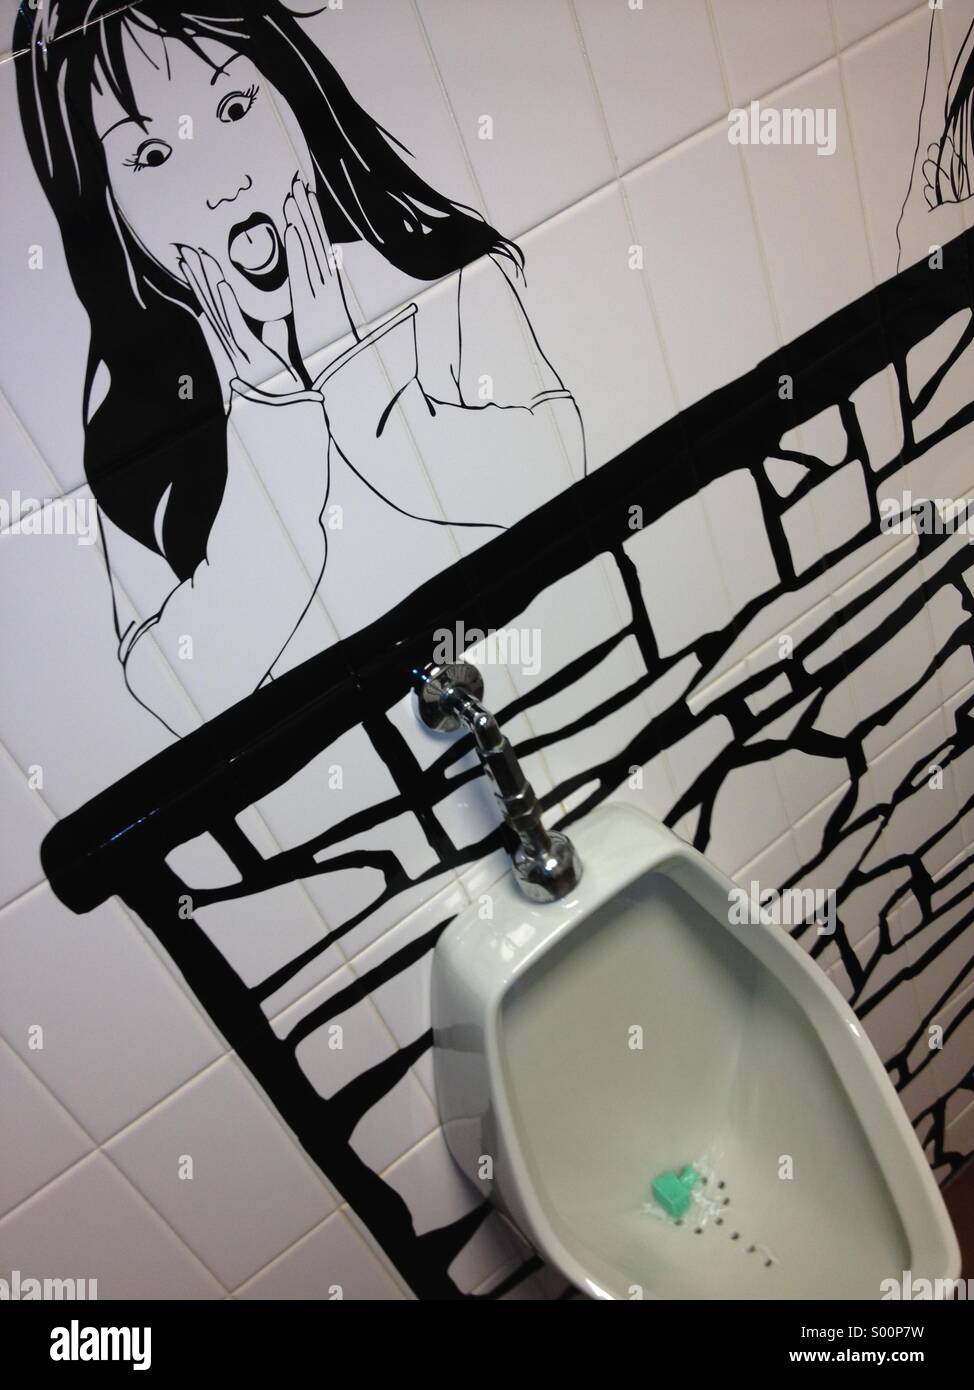 Sketch of young woman above urinal in a men's toilet, arranged to make fun of men's manhood. Stock Photo